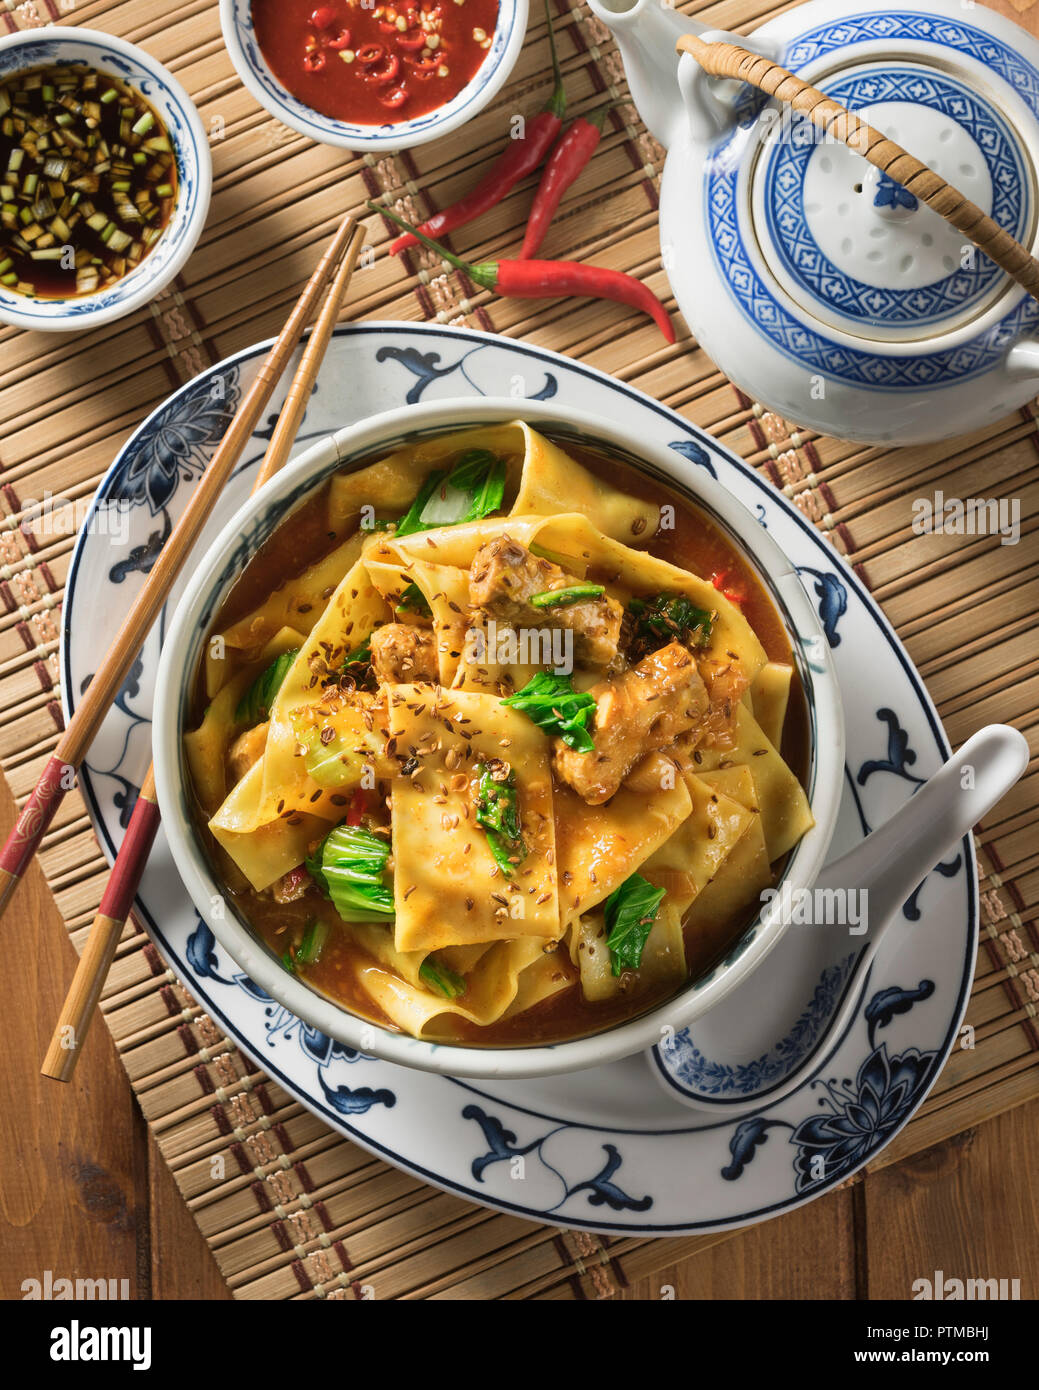 Biang biang noodles. Spicy regional Chinese food Stock Photo - Alamy